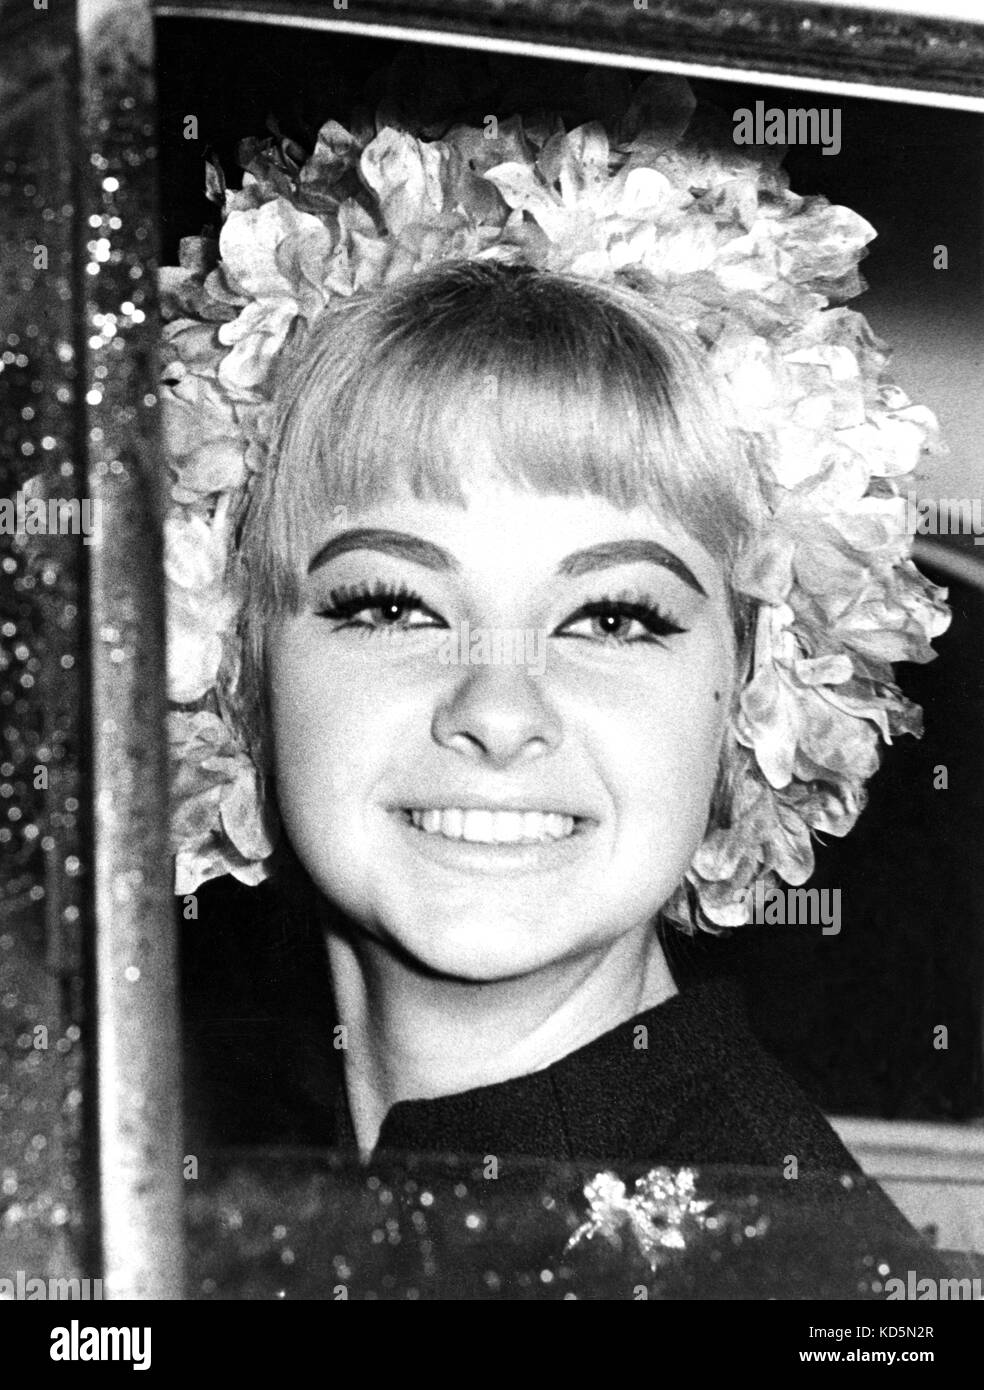 Photo Must Be Credited ©Alpha Press 050000 29/06/1963 The Profumo Affair. 18 yr old Mandy Rice Davies after she had given evidence in the case against Dr Stephen Ward the society osteopath who is charged with living on immoral earnings.The case is being held at Marylebone Magistrates Court. Stock Photo